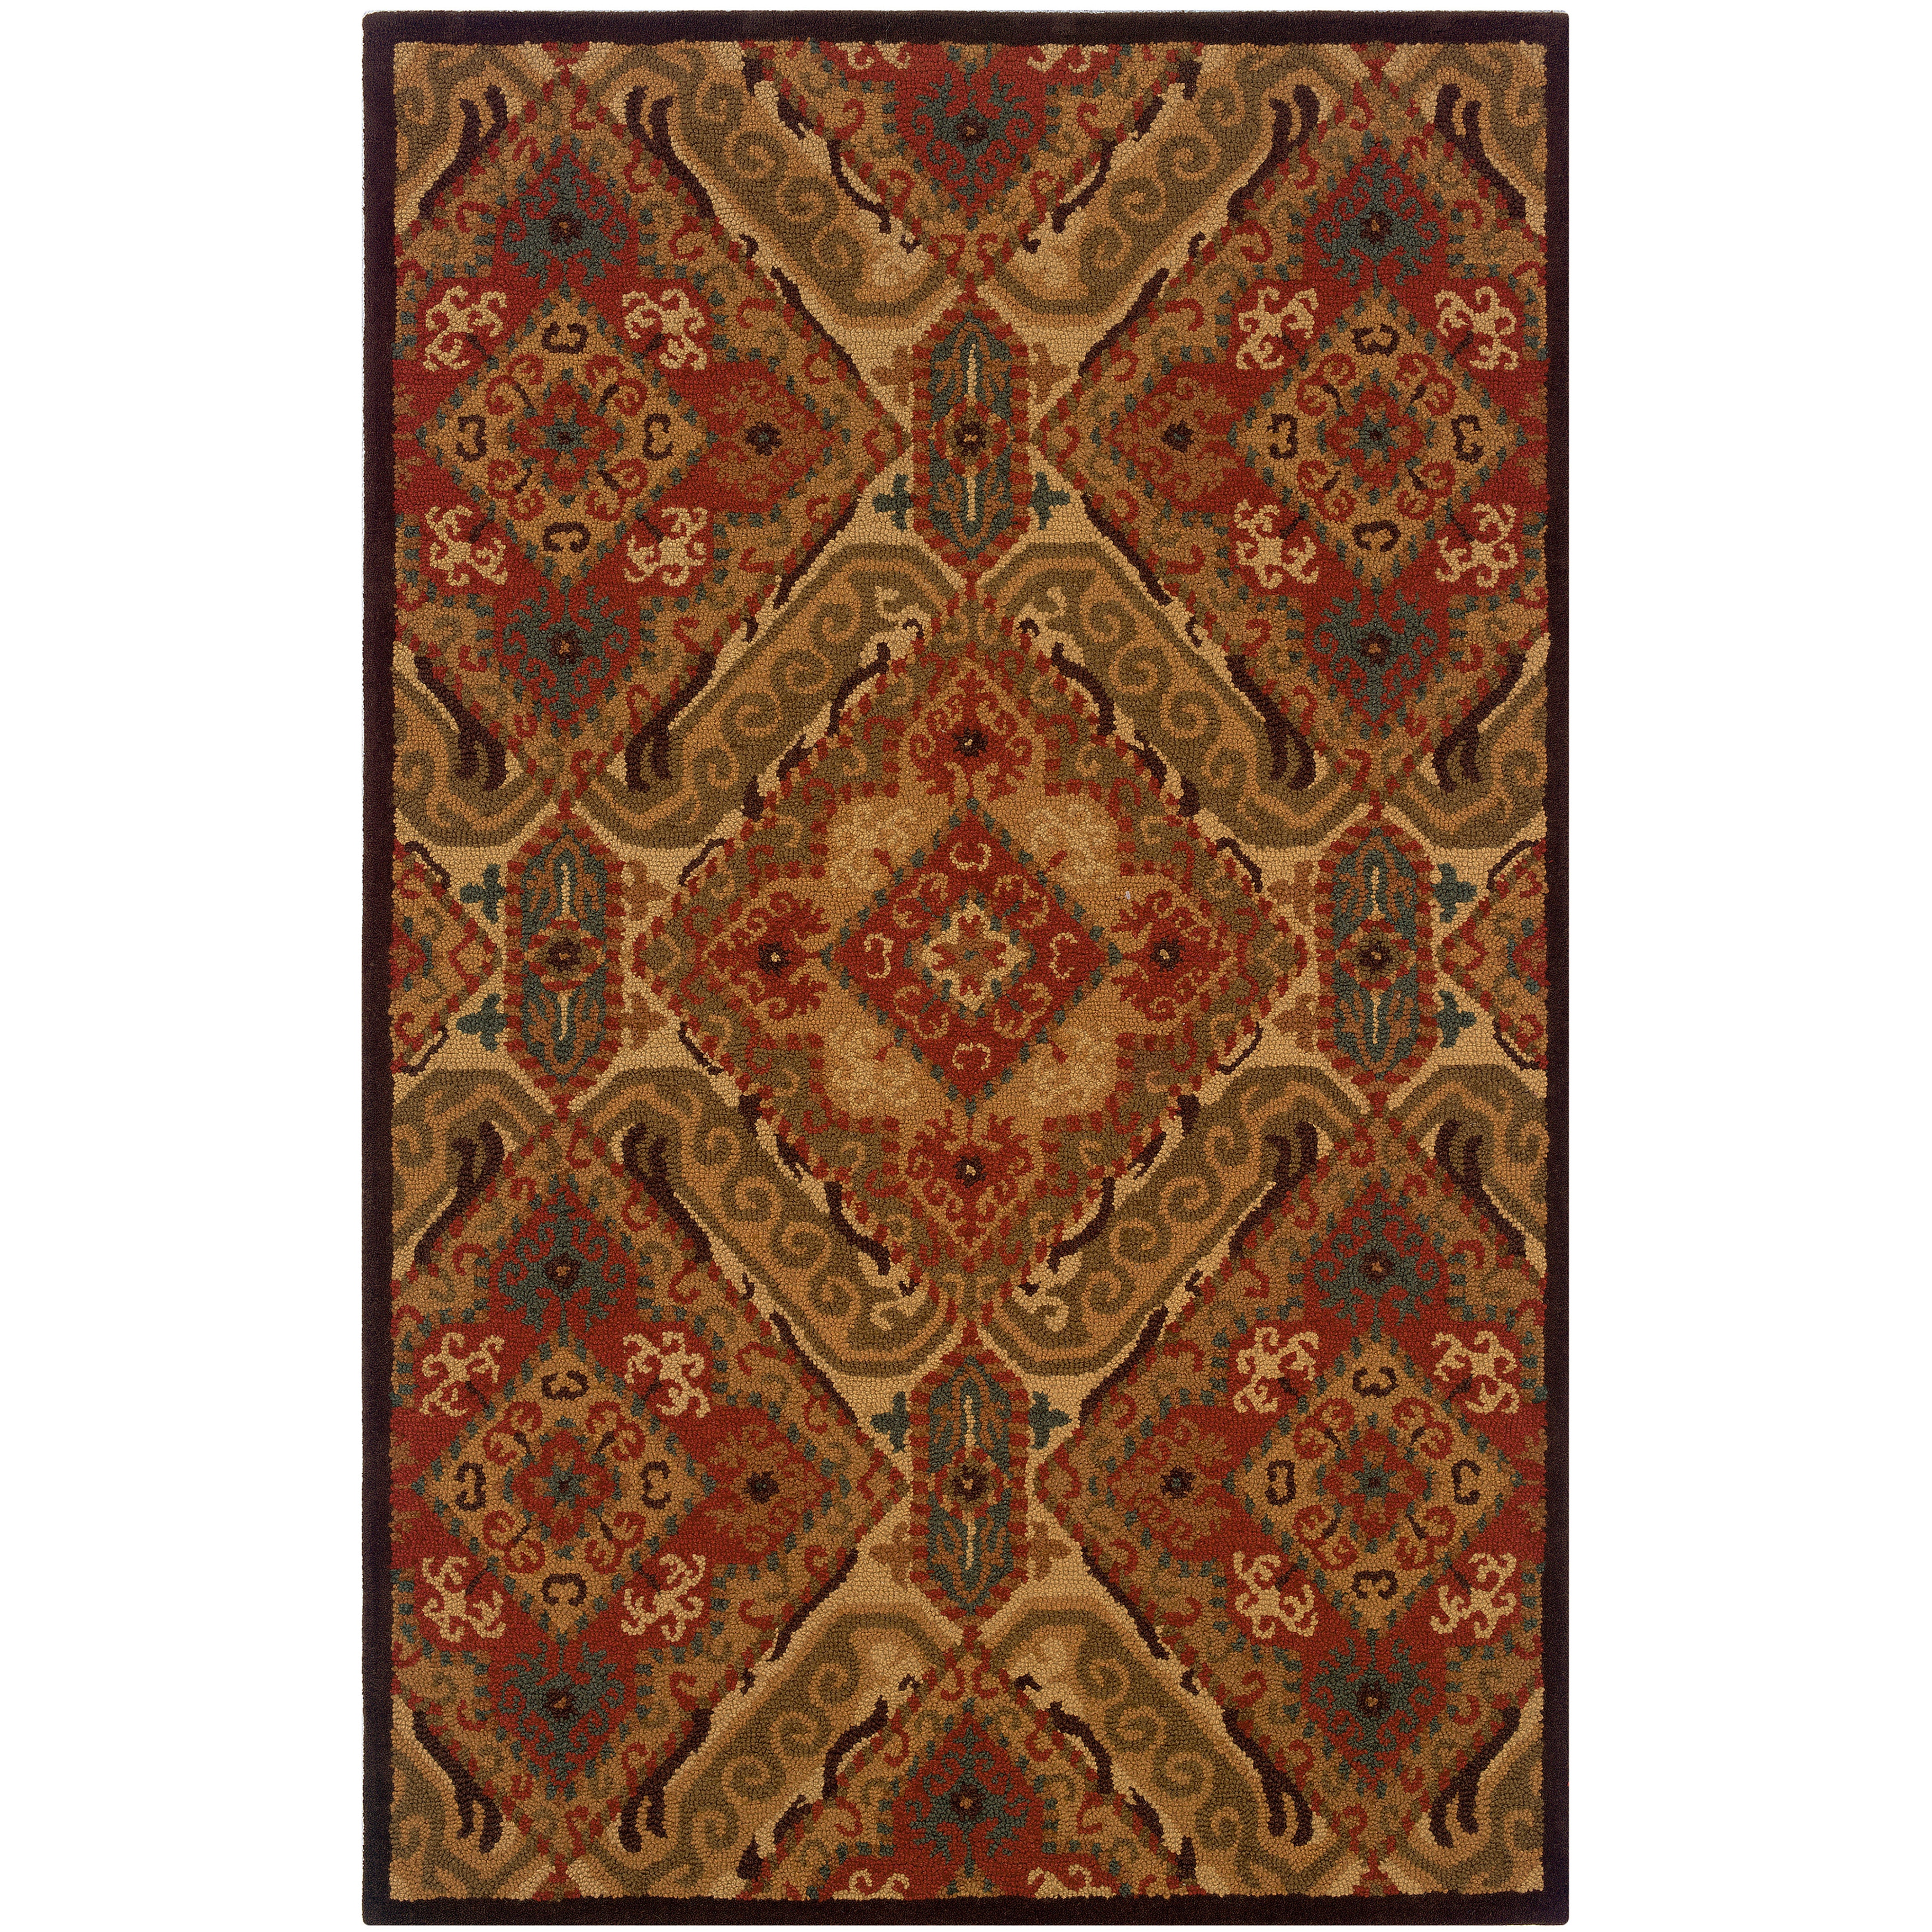 Lnr Home Dazzle Red Rectangle Area Rug (5 X 79)